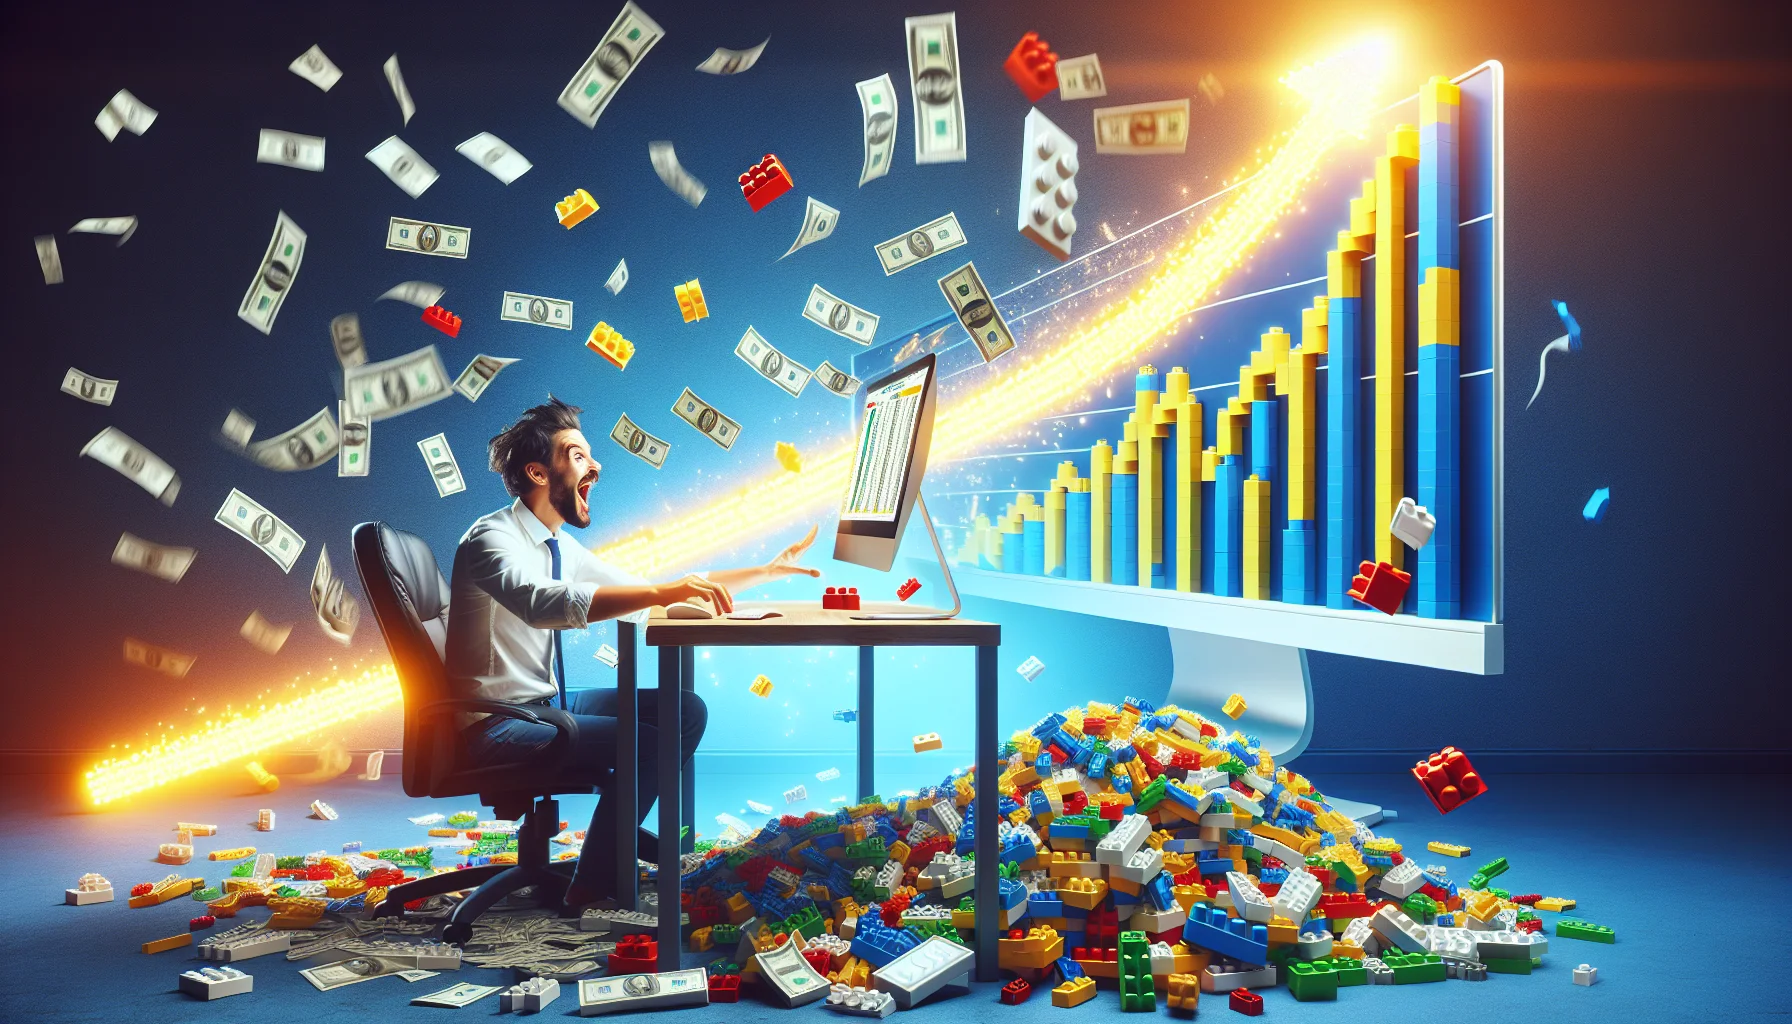 Create a humor-filled, realistic image showcasing an affiliate program for a generic building block toy, styled like Lego, in a compelling scenario related to making money online. The image could include an enthusiastic person, sitting at their computer desk in their home office, with a momentous expression. Surrounded by stacks of plastic toy blocks, they're looking at their computer screen which displays a dynamic growth chart, indicating the rising income. A flash of light from the screen illuminates their room, suggesting the exciting opportunity. Please include no brands or logos in the image.